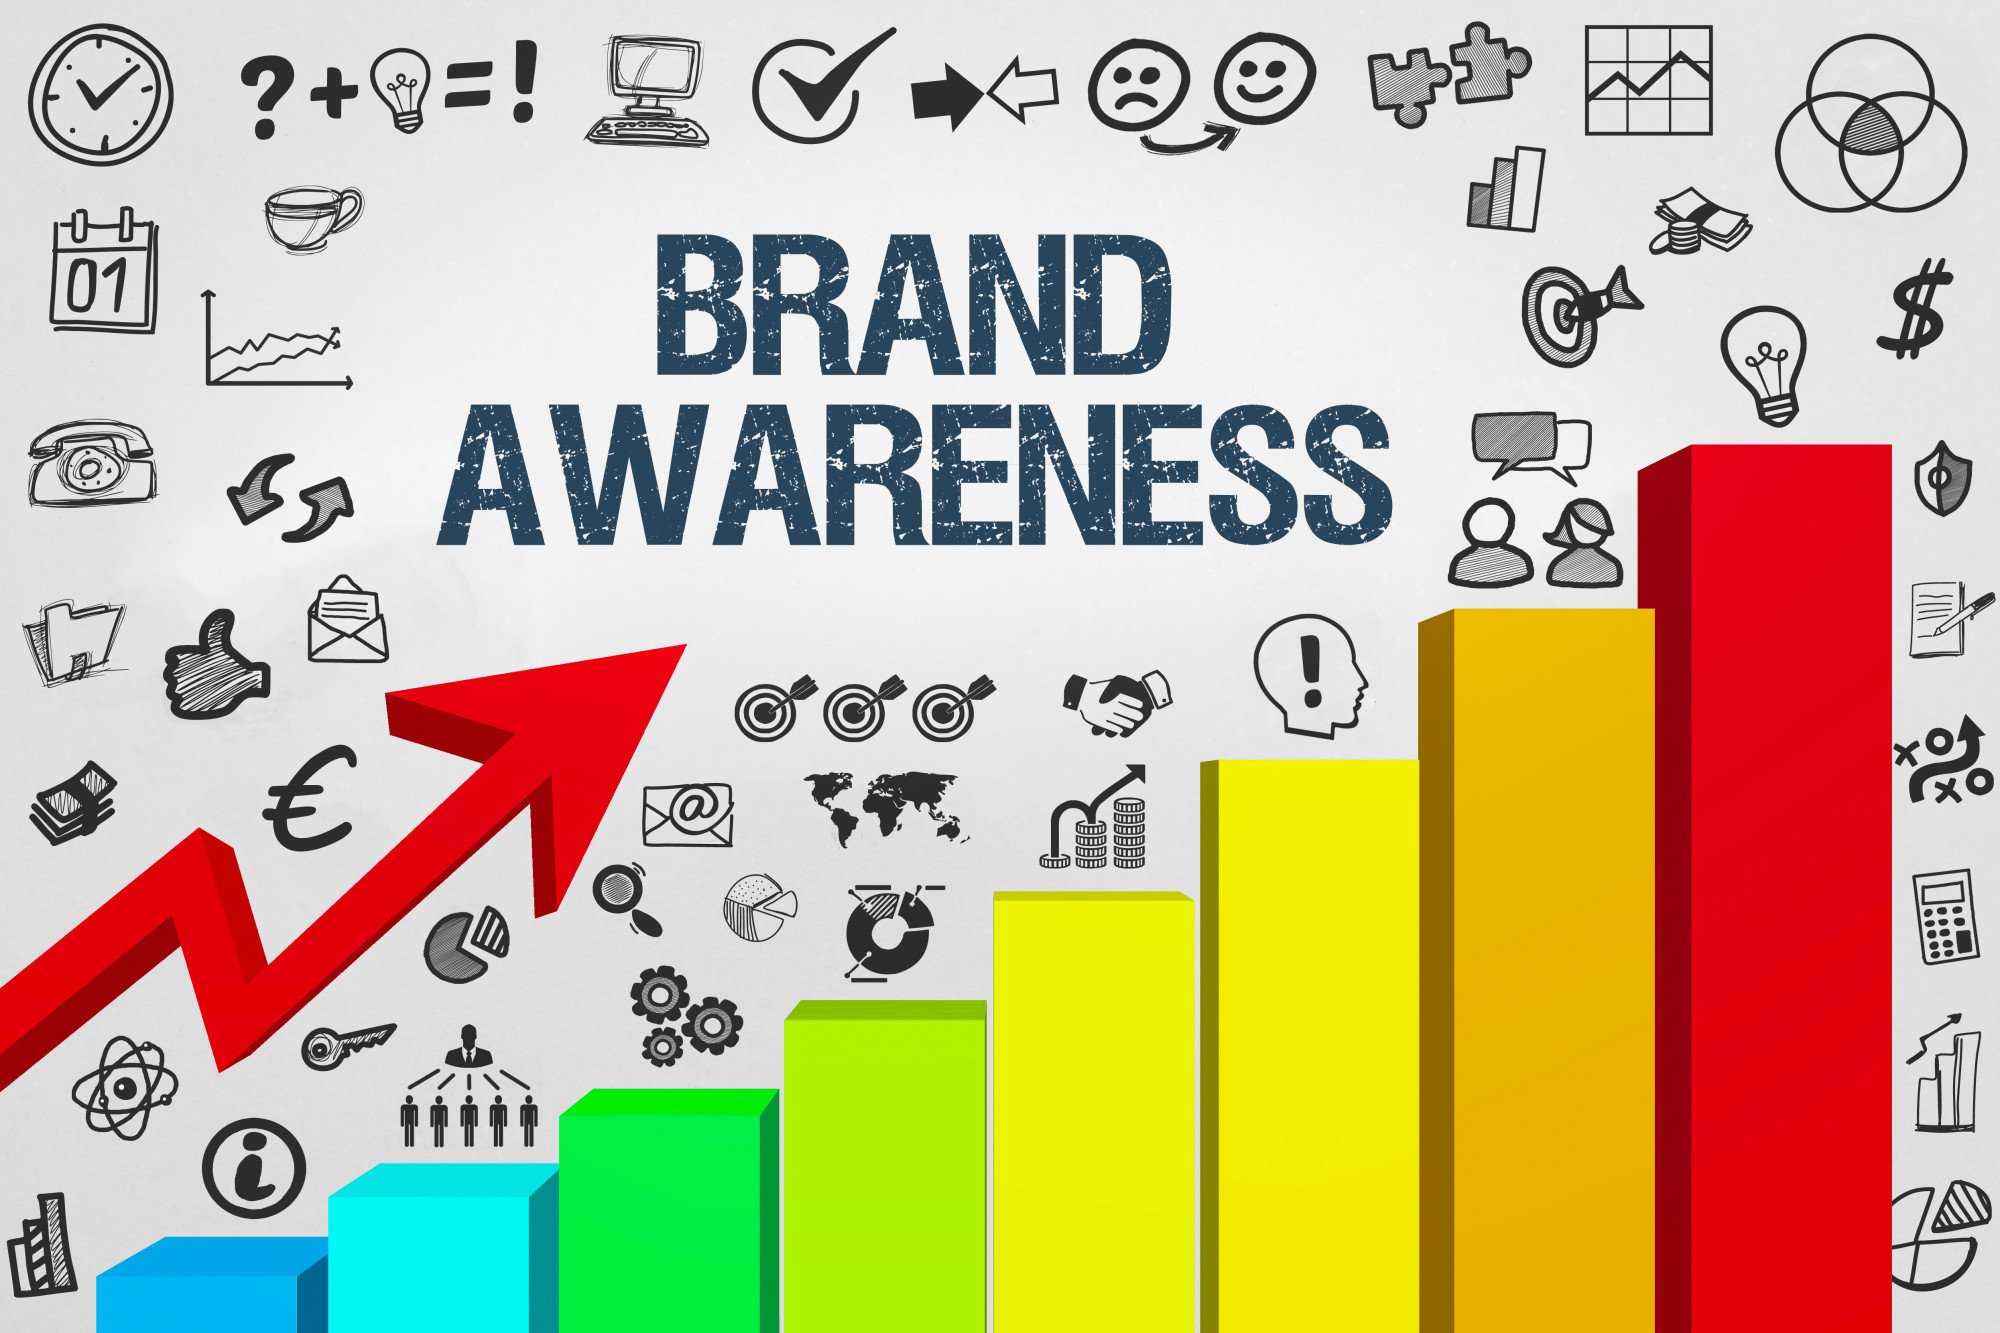 How to Leverage Brand Awareness Tools Into Future Sales